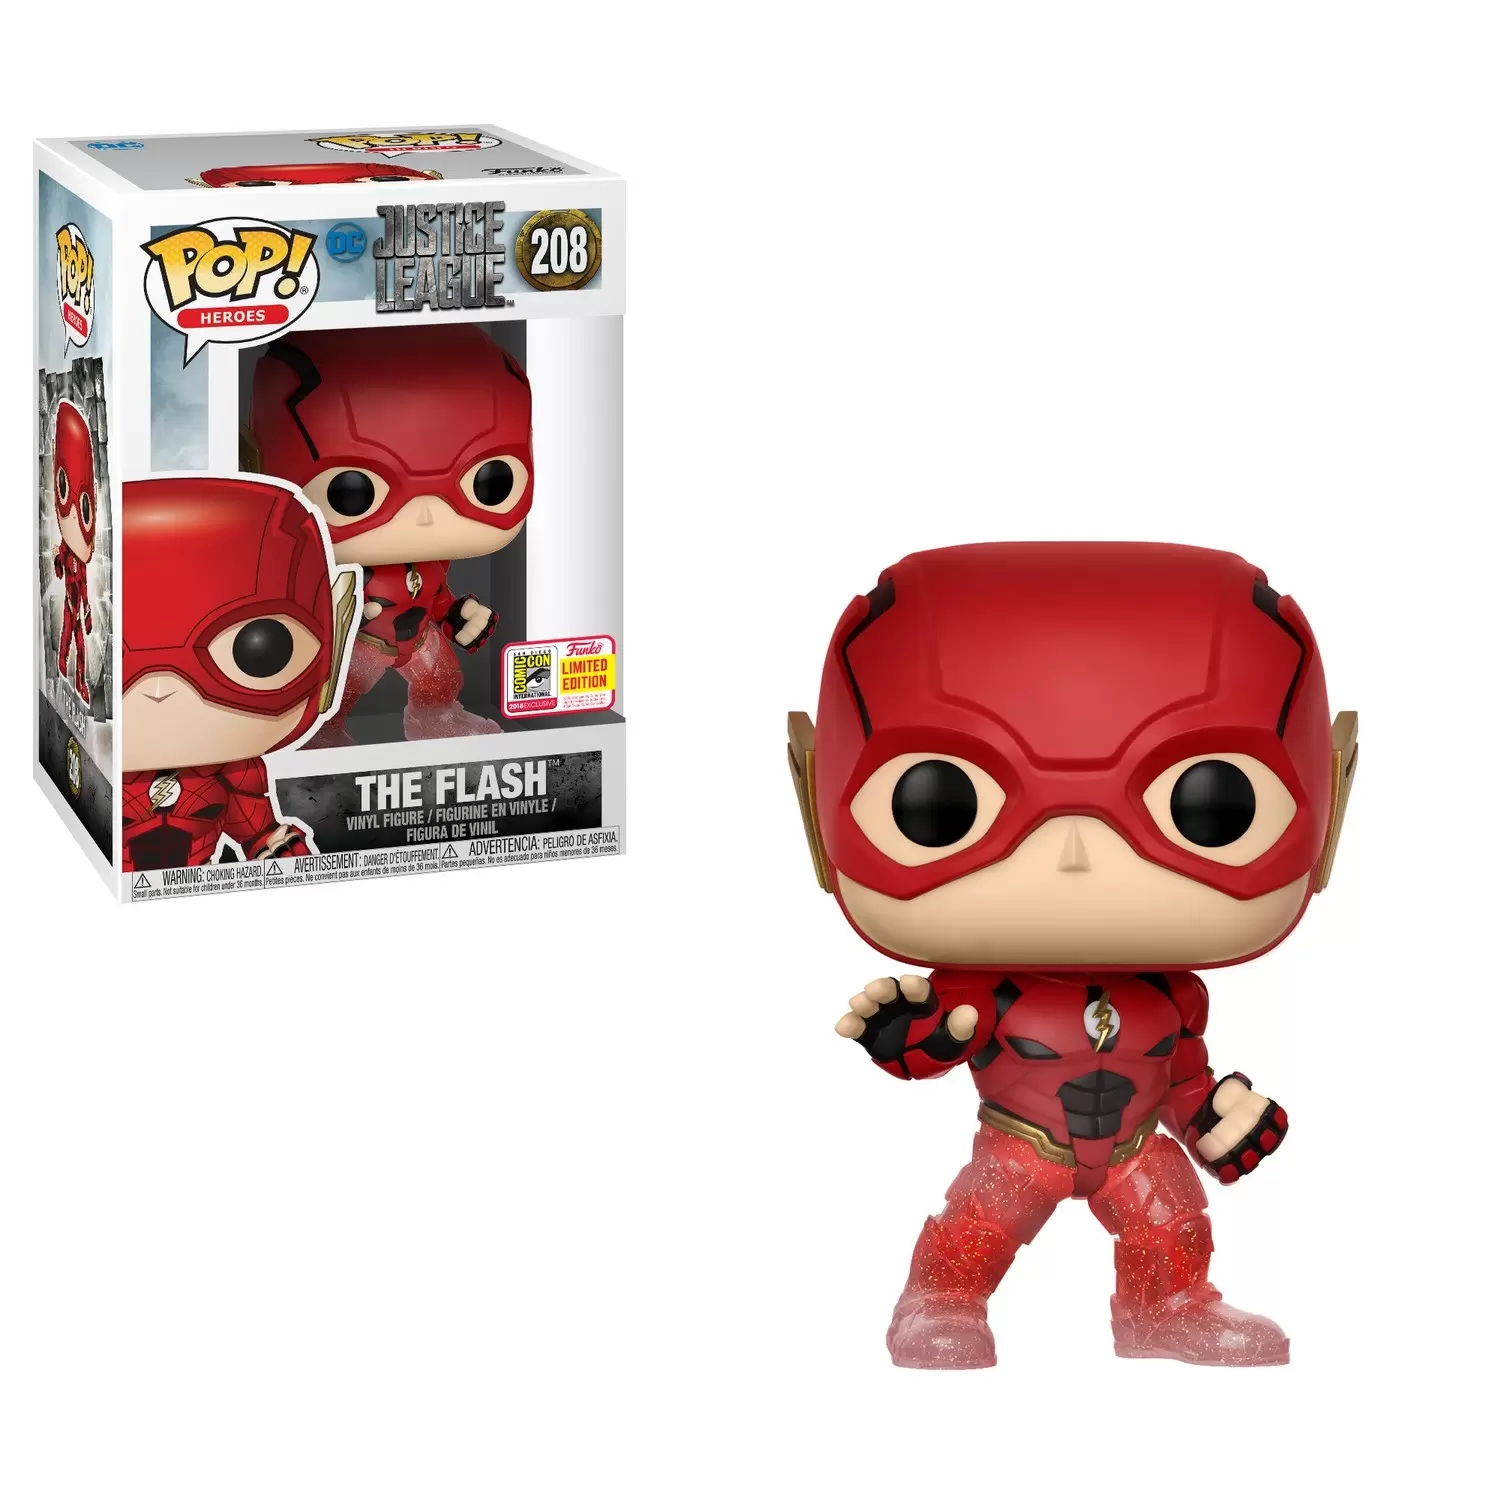 POP! Heroes - Justice League - The Flash (SDCC)